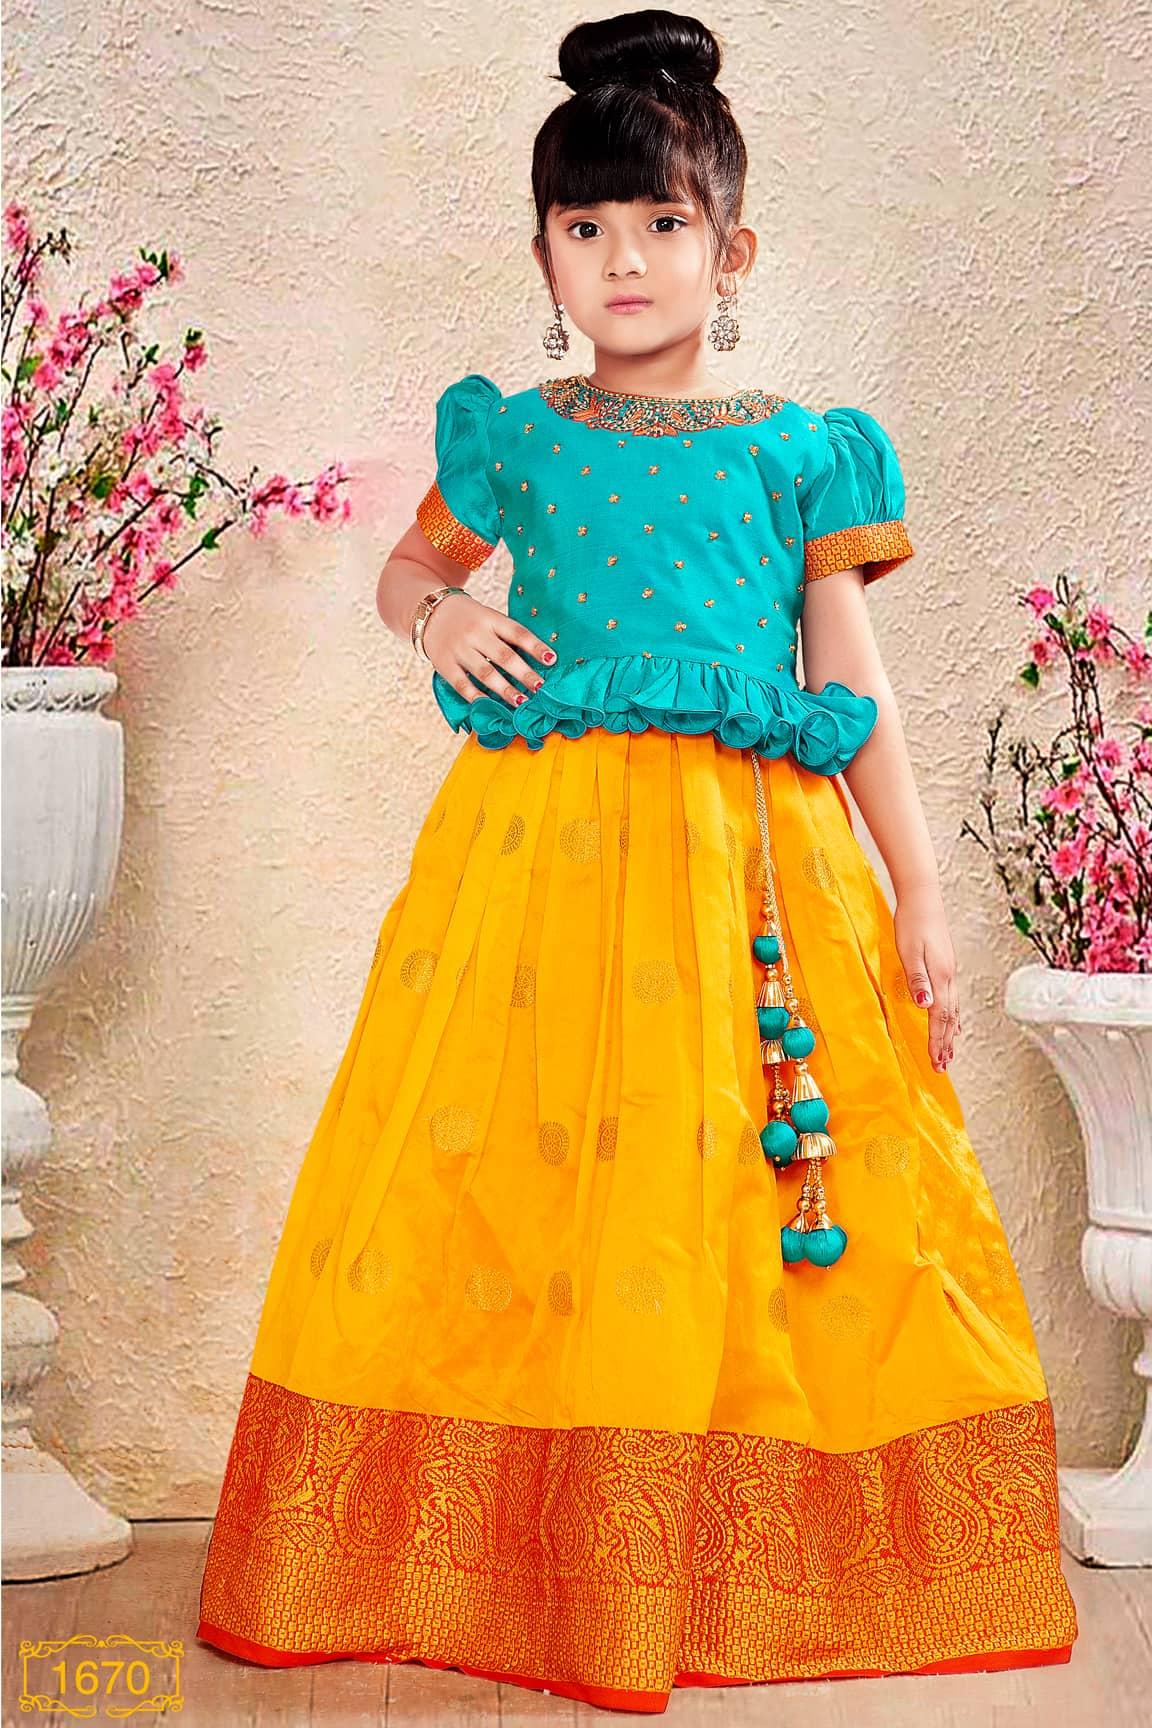 Blue and Yellow with Red Border Pattu Pavadai for Girls - Lagorii Kids